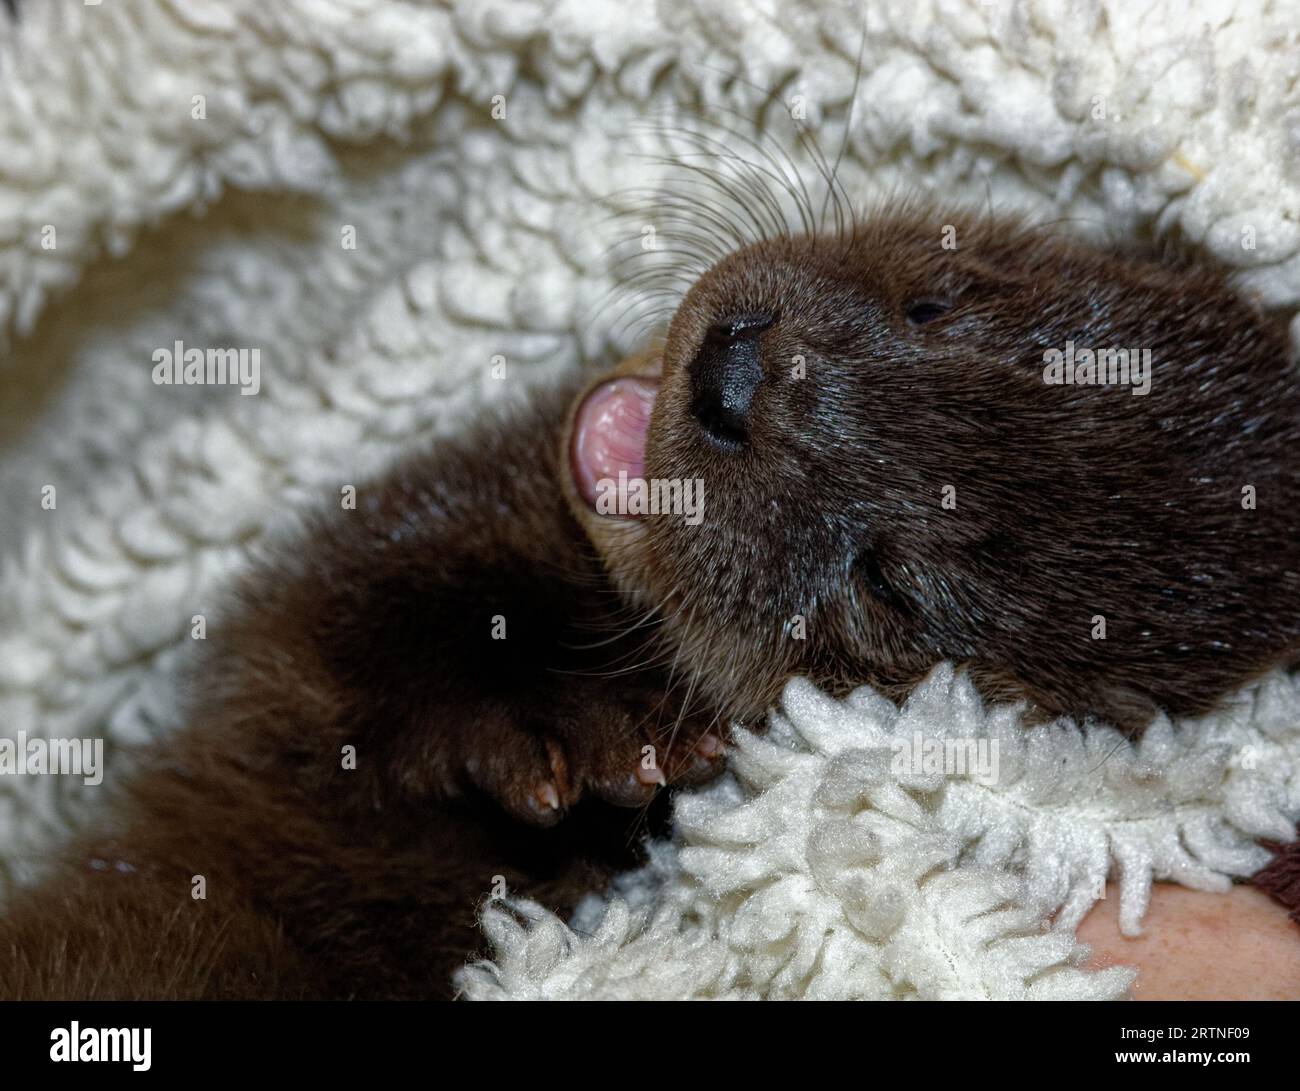 Eurasian Otter (Lutra lutra) 8 week old cub resting,yawning. Stock Photo